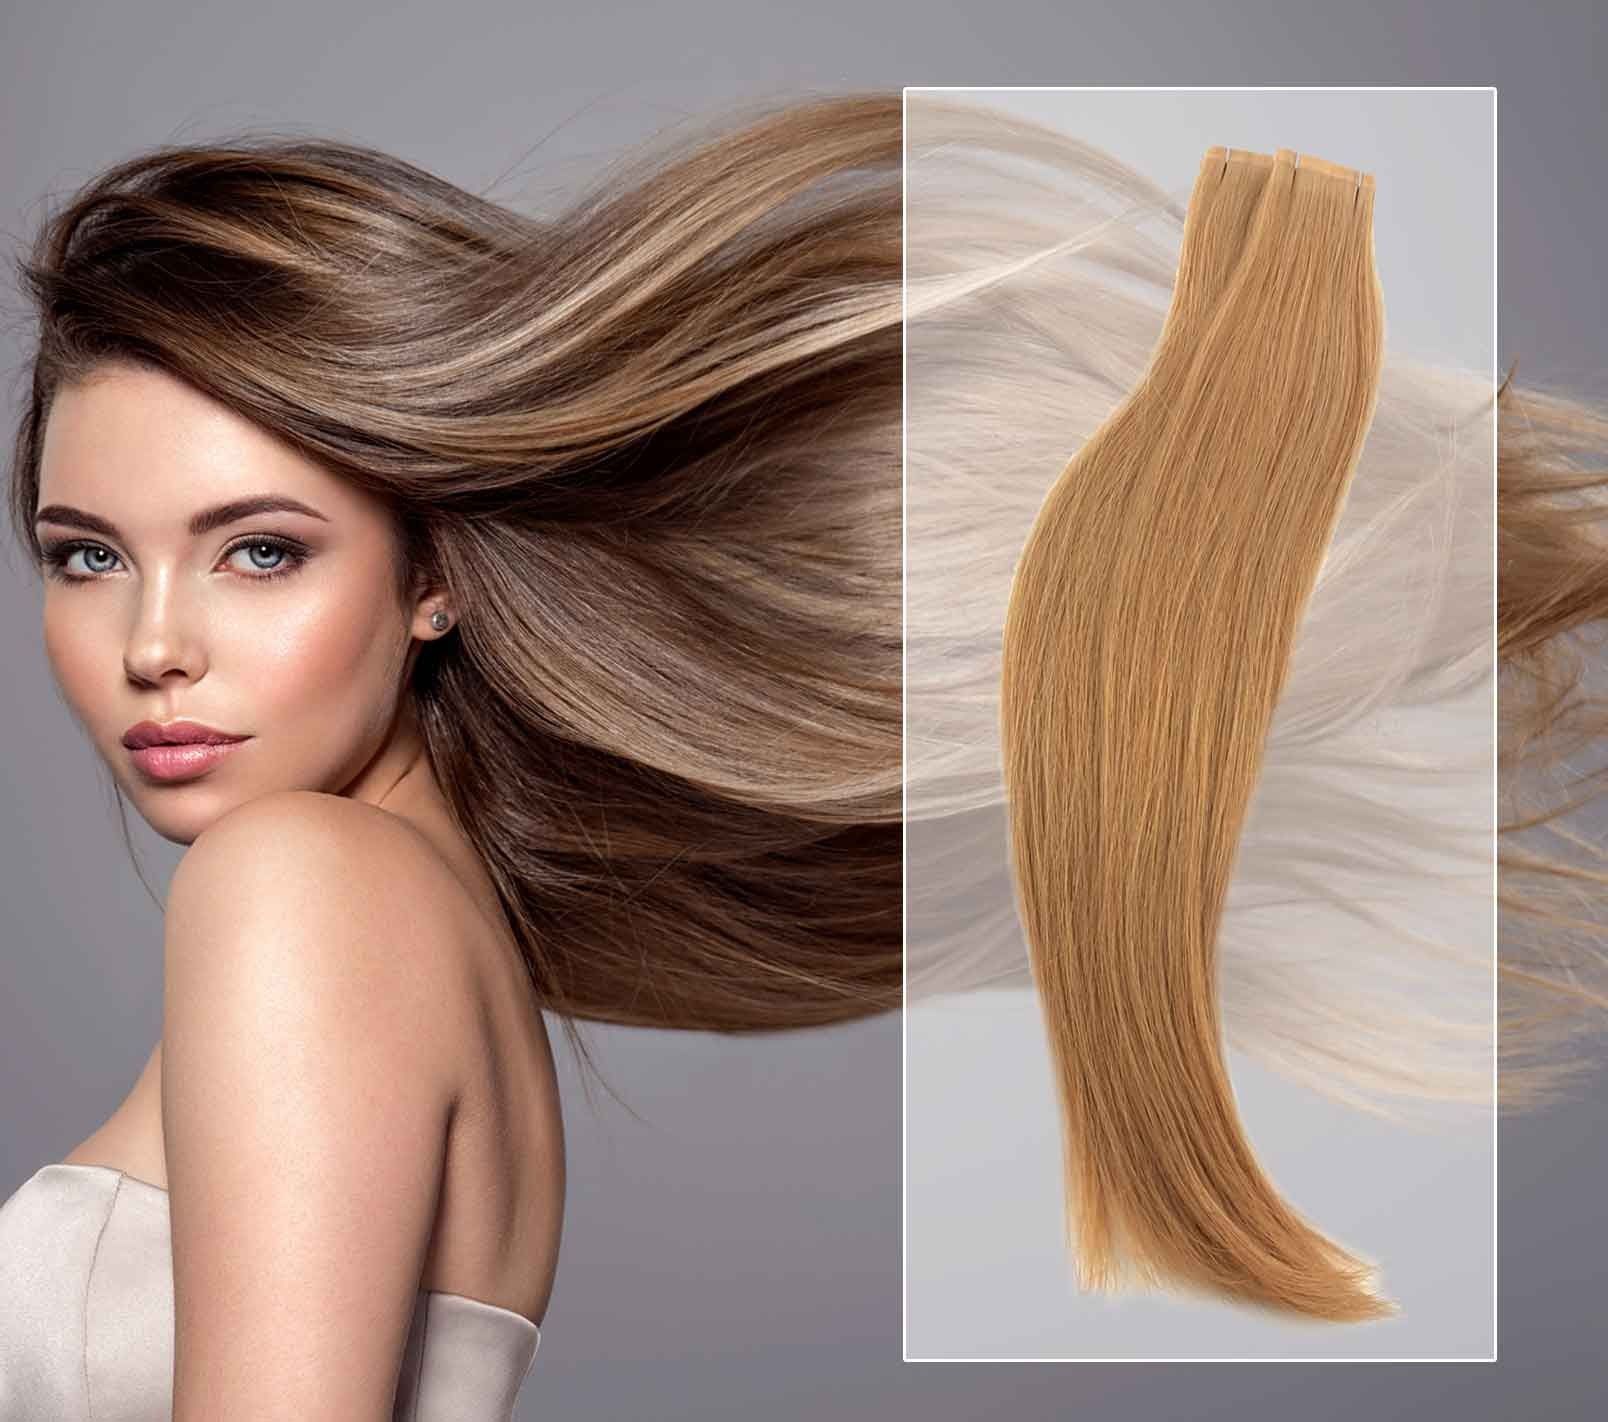 Tape Hair Extension of Russian Hair - Best Quality Hair